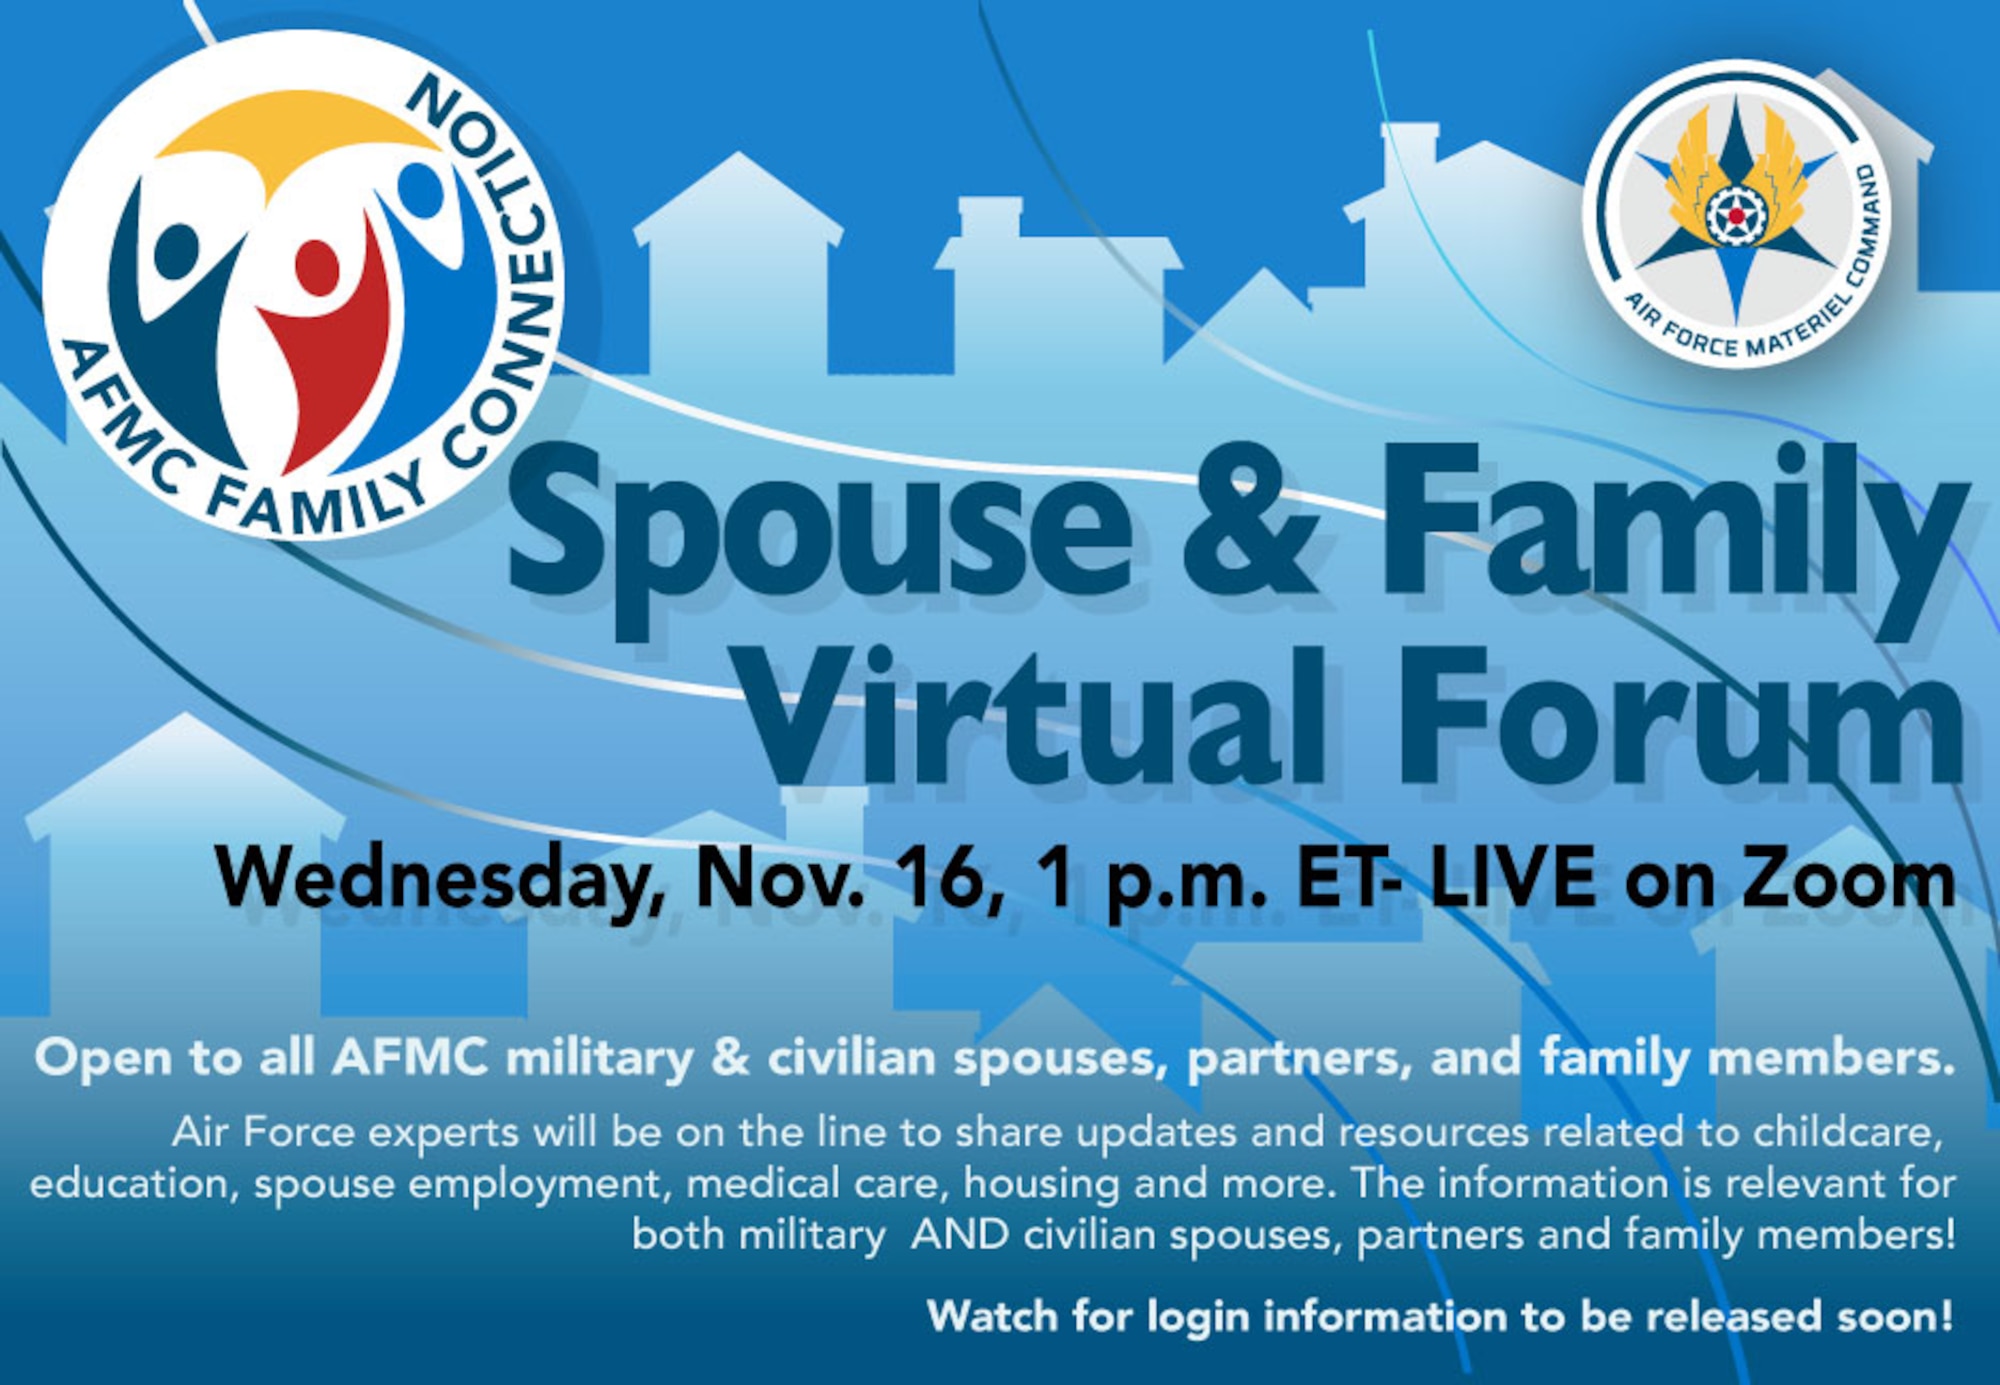 The Air Force Materiel Command will host a virtual Spouse and Family Forum, Nov. 16, at 1 p.m. ET, open to military and civilian family members across the enterprise.